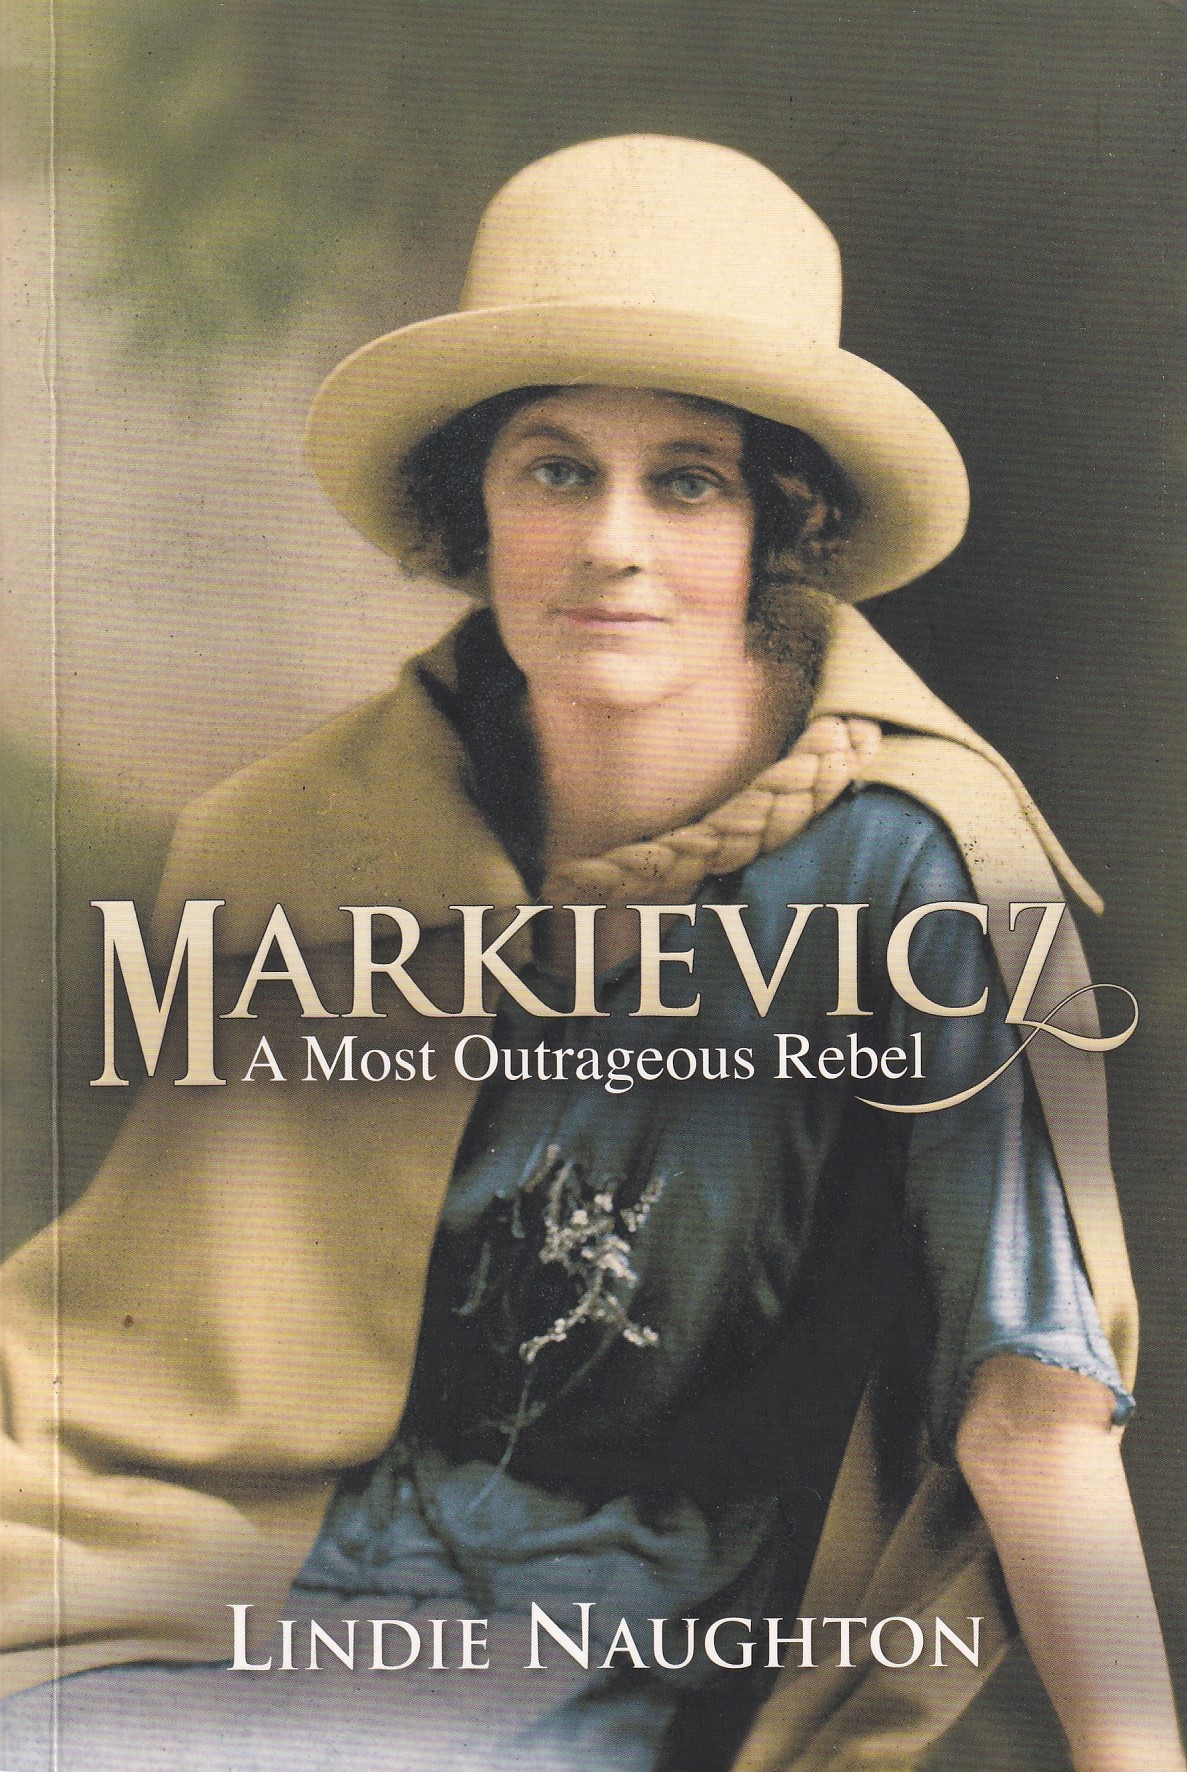 Markievicz A Most Outrageous Rebel | Naughton, Lindie | Charlie Byrne's